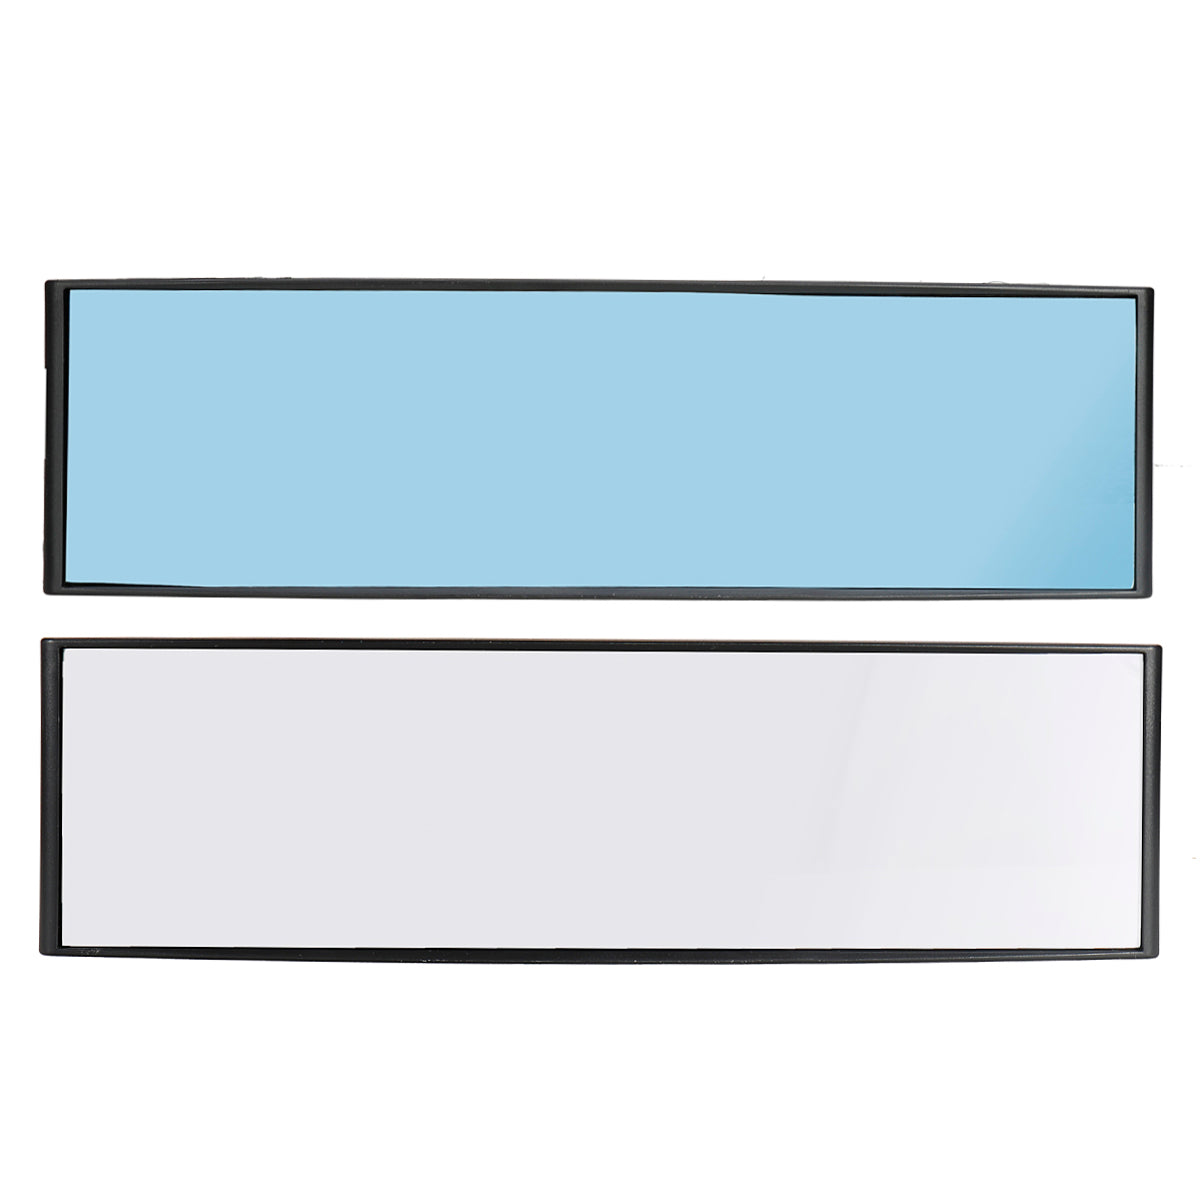 Light Blue Car Interior Panoramic 270mm Convex Rear View Rearview Mirror Universal Clip On